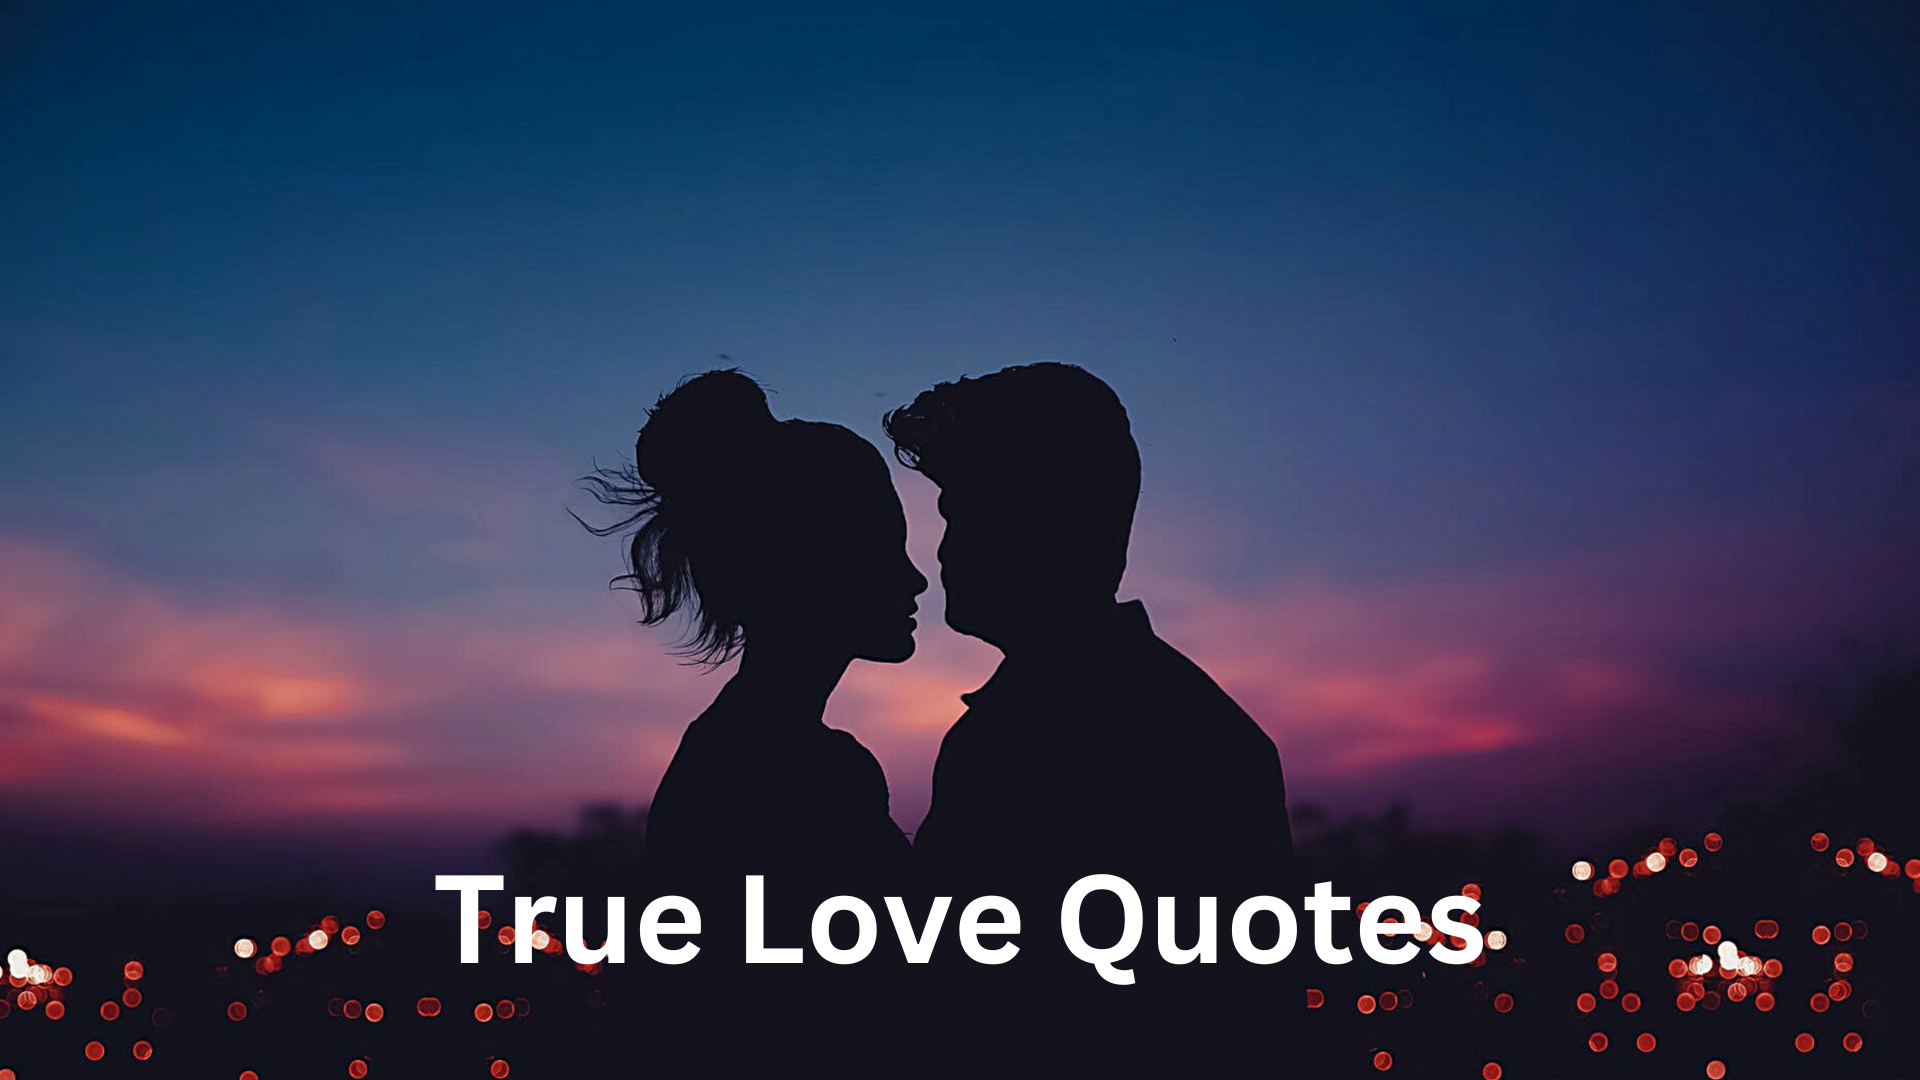 20 Love Quotes That Express The True Meaning Of Love